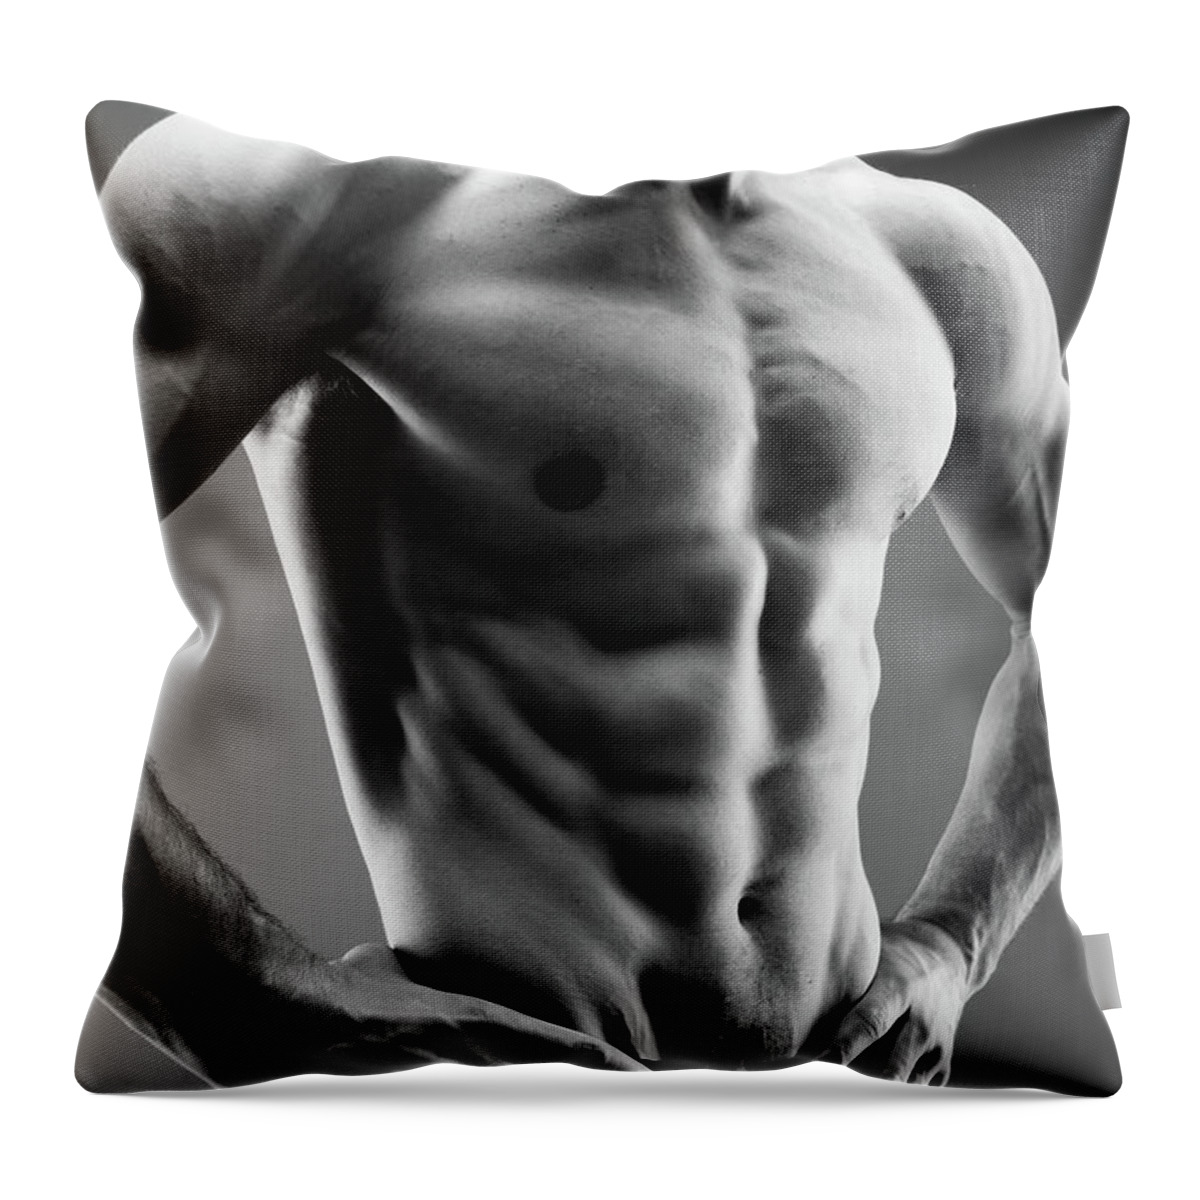 Abdominal Muscle Throw Pillow featuring the photograph Perfect Male Body by Georgijevic